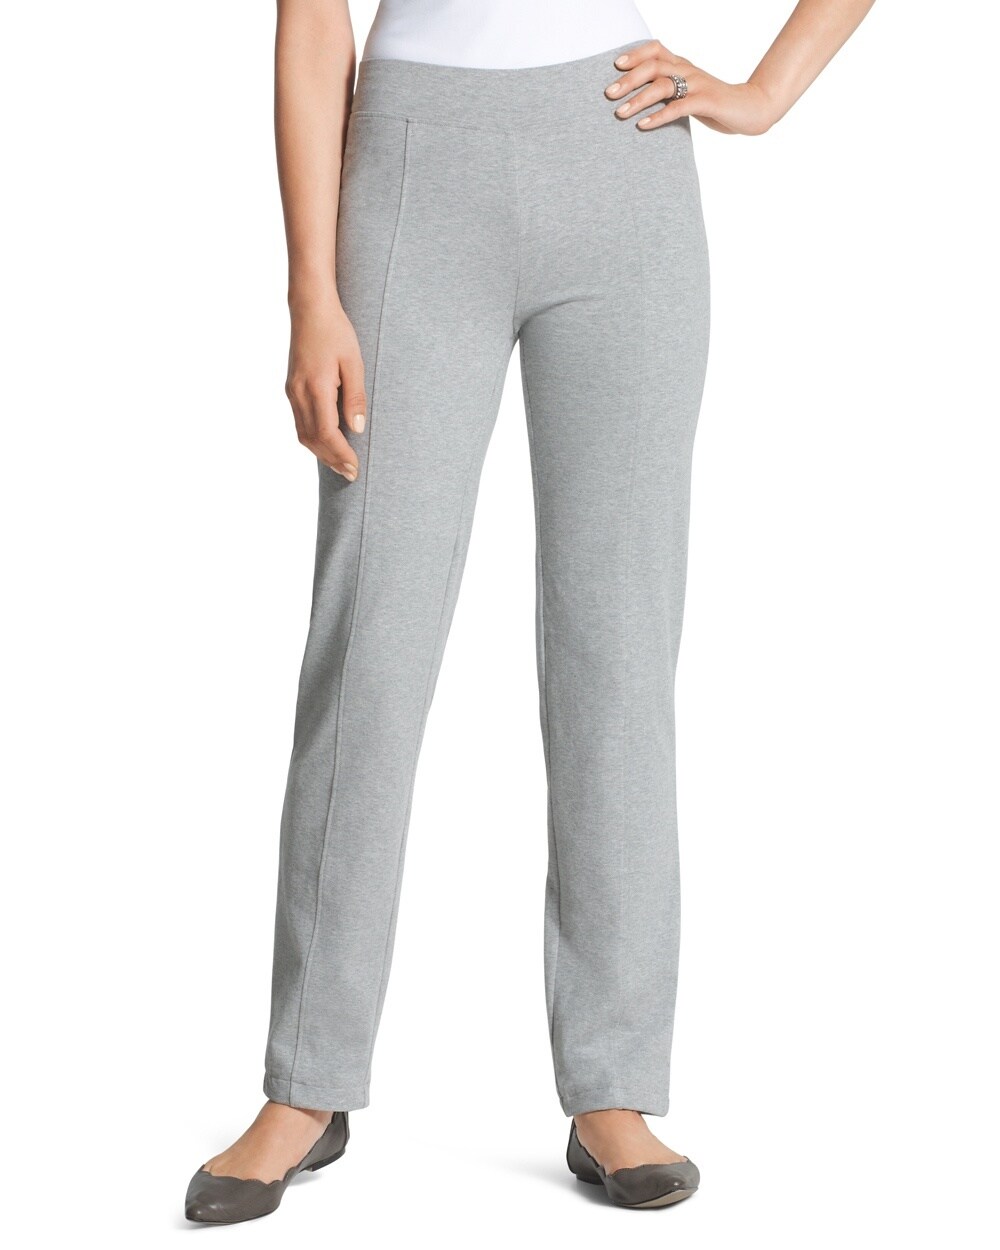 Zenergy Knit Collection Cozy Jersey Pants in Grey